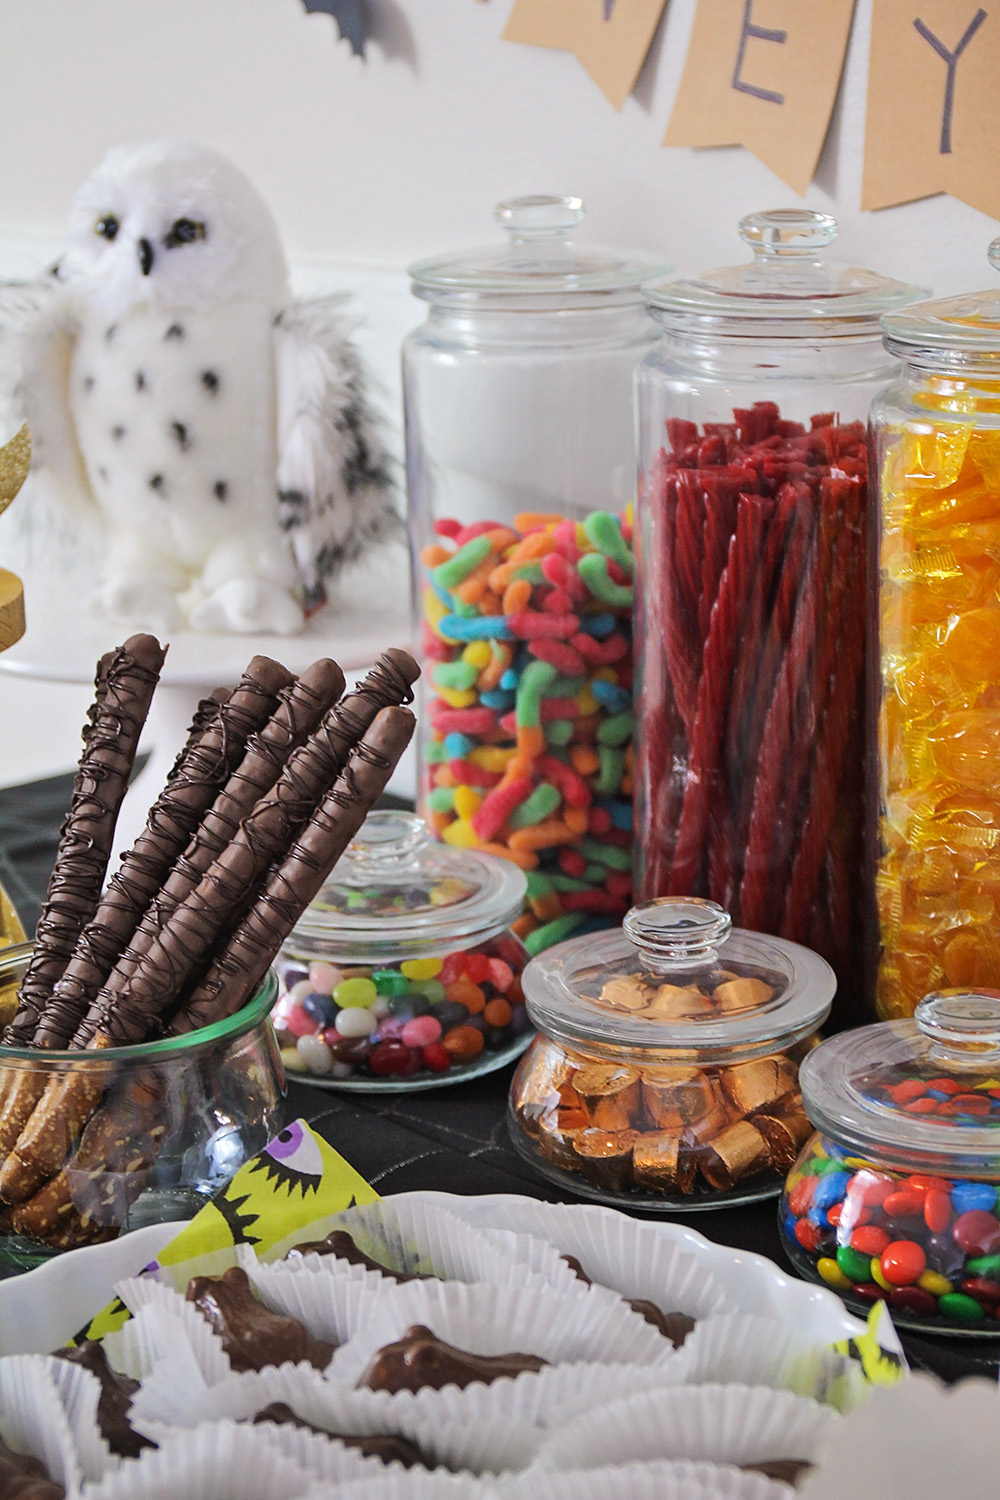 Set up your own version of the famous Honeydukes sweet shop with these fun and easy ideas and recipes!